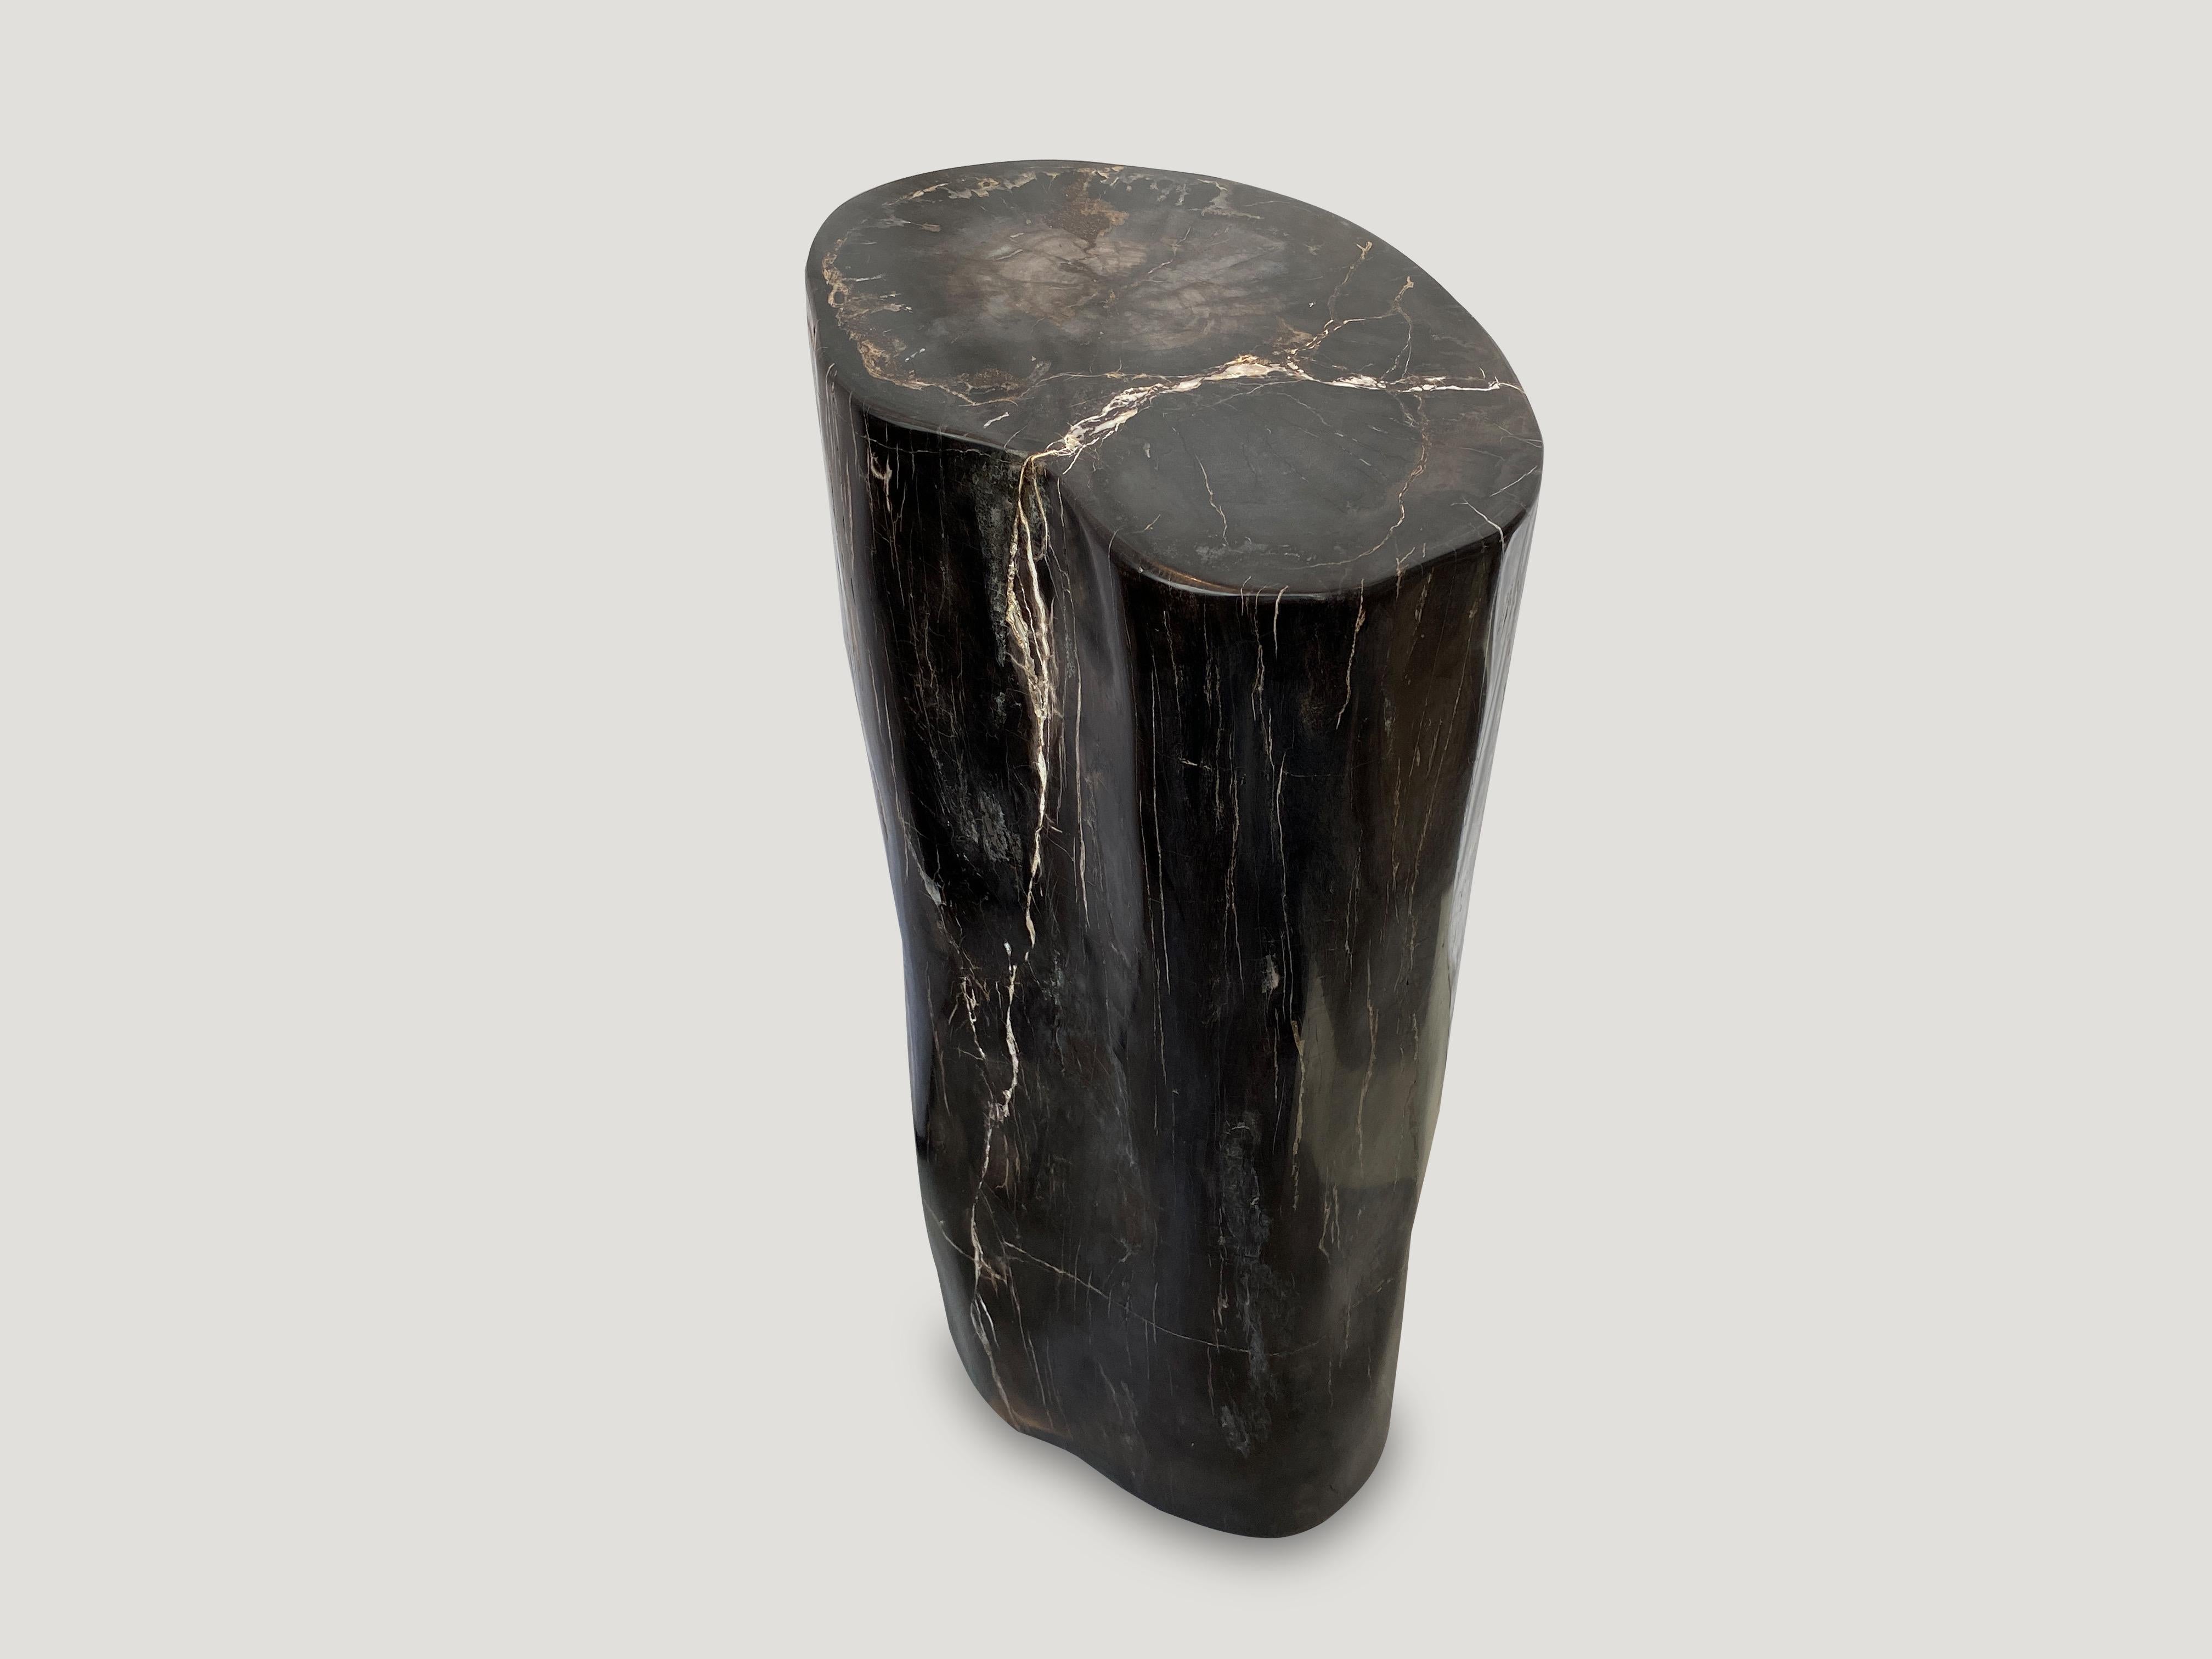 Impressive super smooth high quality petrified wood pedestal or side table. We have a pair cut from the same petrified wood log. The size and images reflect the single one shown. The pair are shown together in the final images.

As with a diamond,